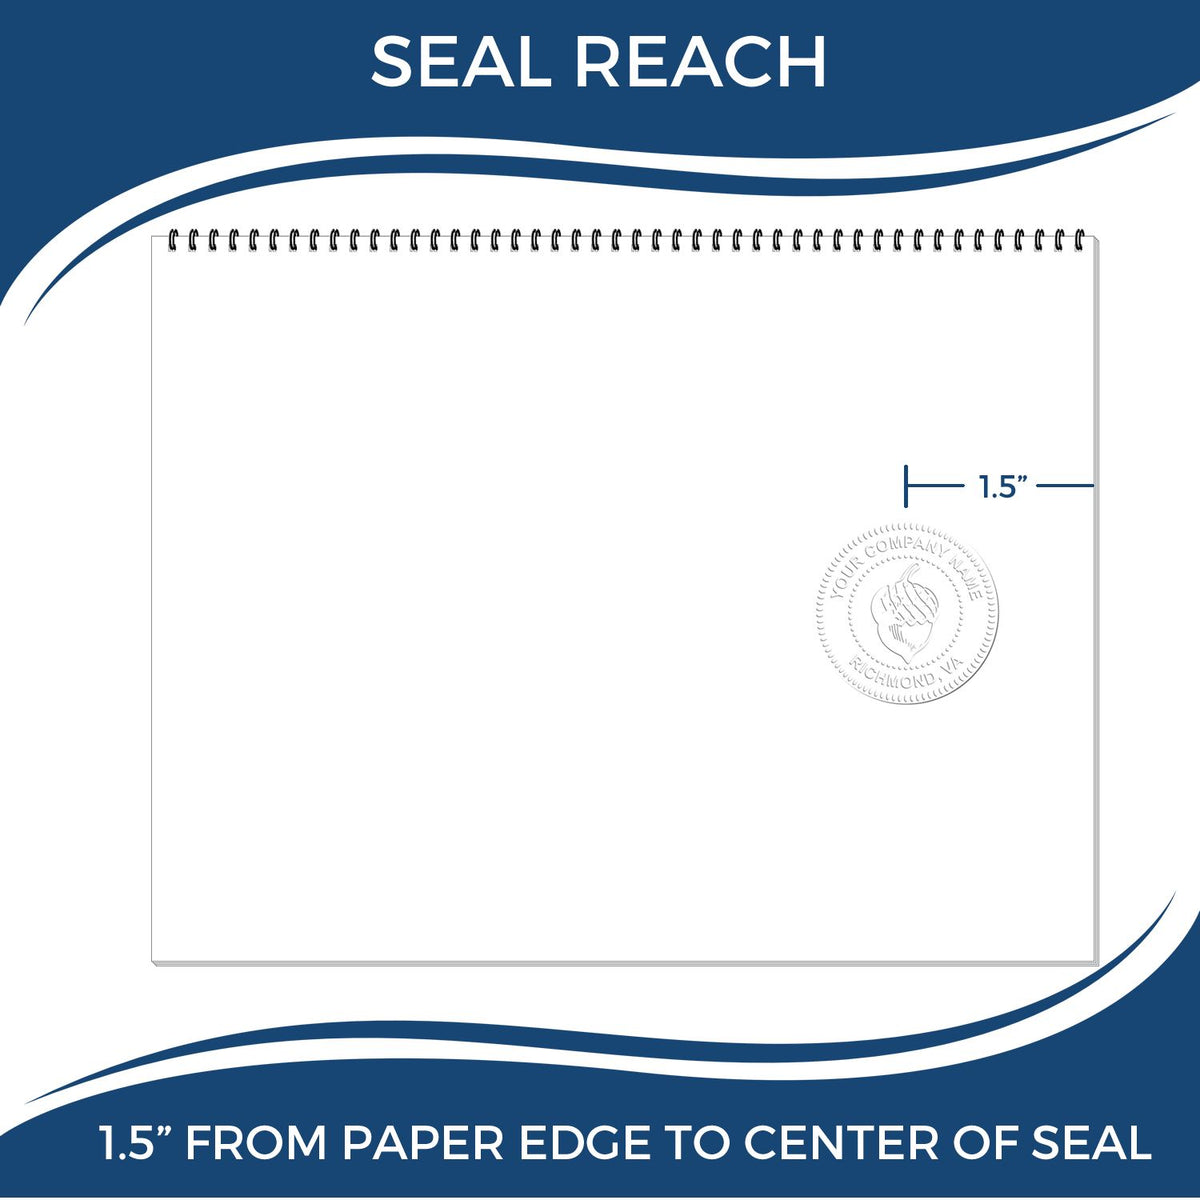 An infographic showing the seal reach which is represented by a ruler and a miniature seal image of the Soft New York Professional Geologist Seal